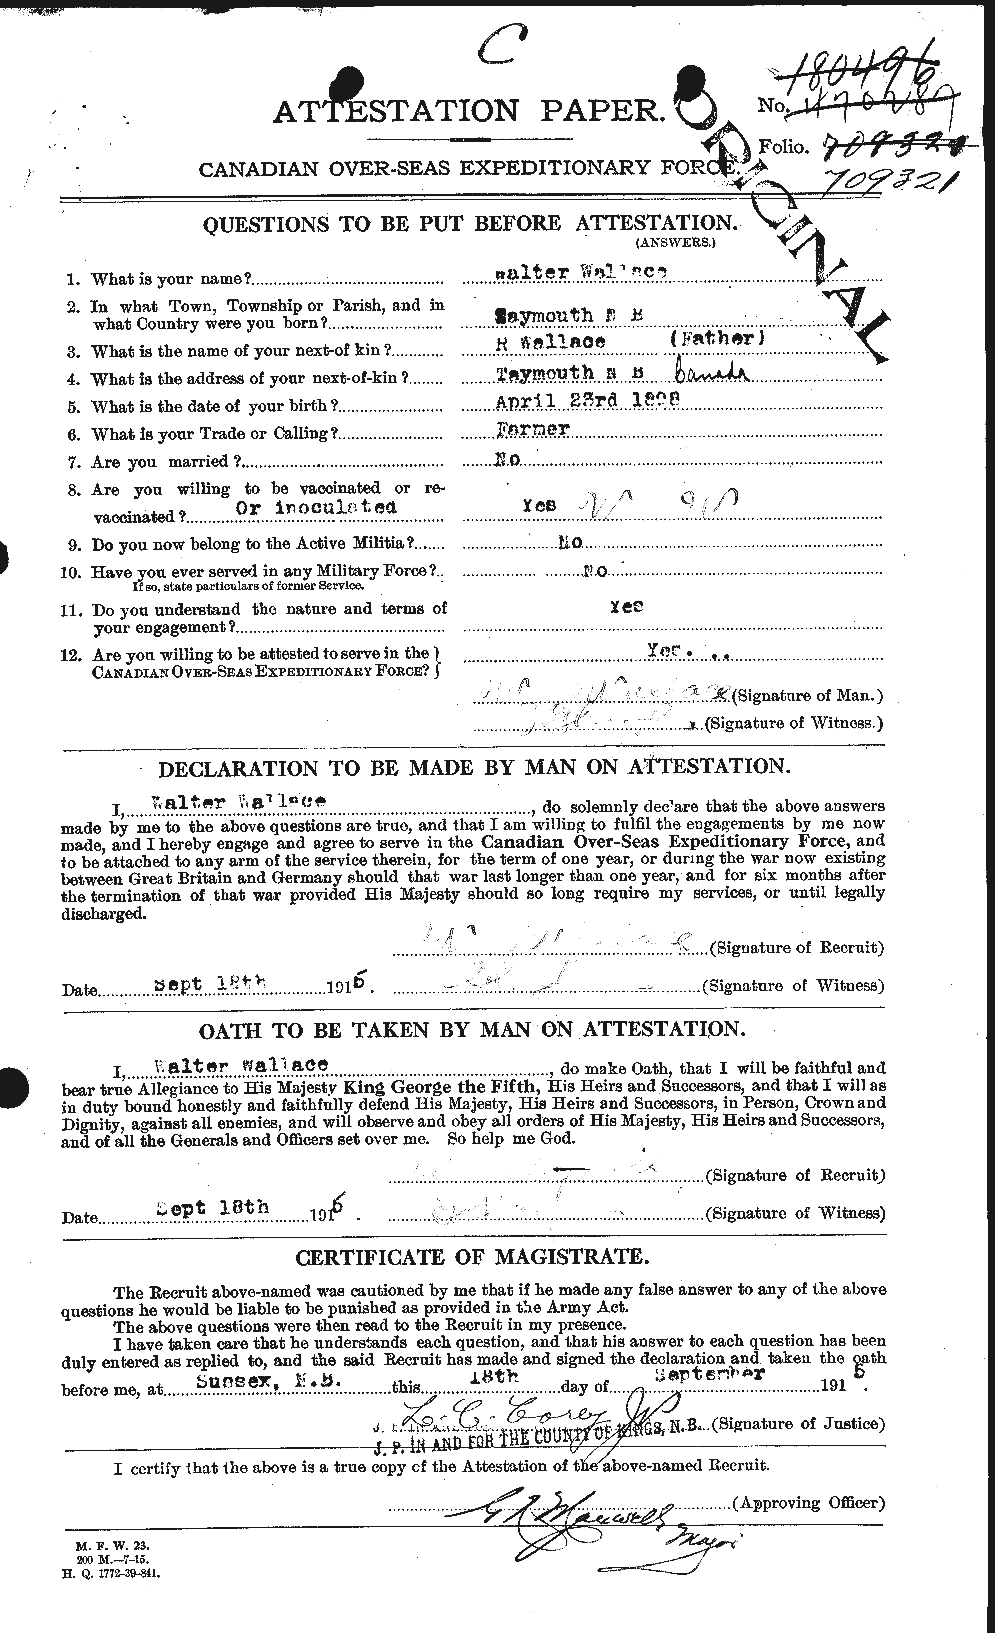 Personnel Records of the First World War - CEF 660685a